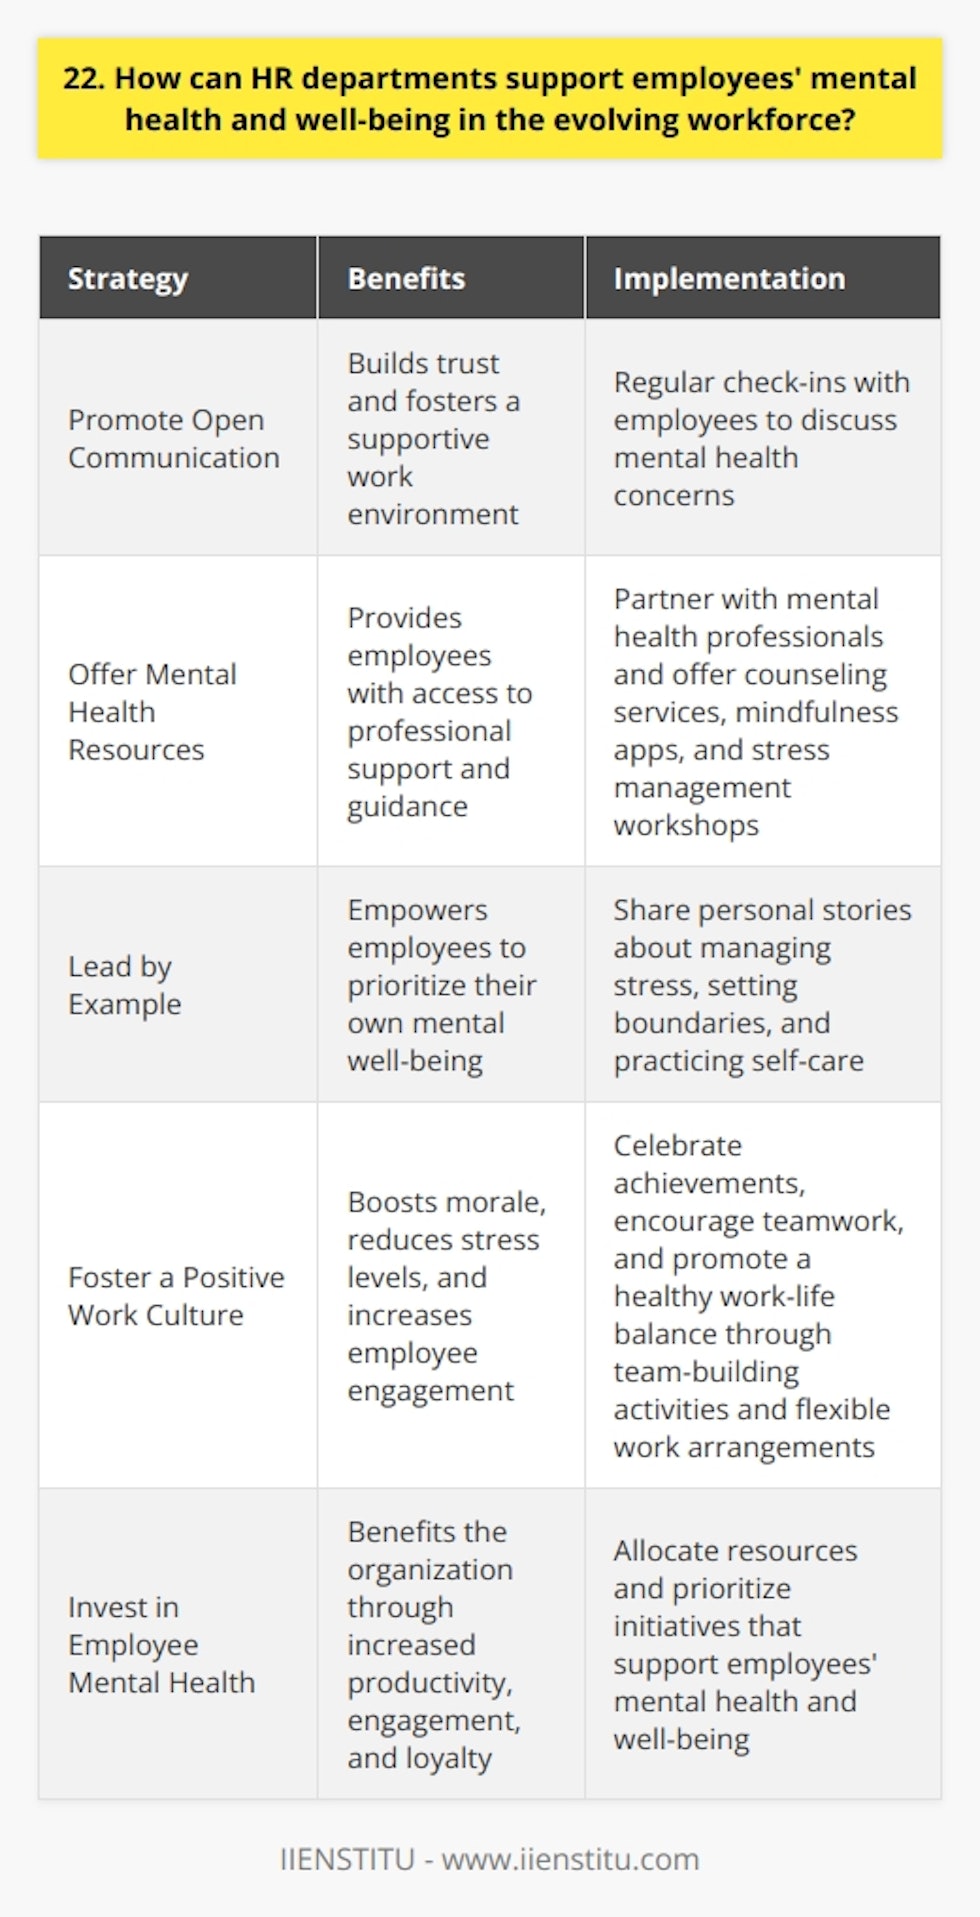 As an HR professional, I believe that supporting employees mental health and well-being is crucial in todays evolving workforce. Here are some ways HR departments can make a positive impact: Promote Open Communication Encourage employees to speak openly about their mental health struggles without fear of judgment or repercussions. Create a safe space where they feel heard and supported. In my experience, having regular check-ins with employees has helped build trust and foster a supportive work environment. Offer Mental Health Resources Provide access to mental health resources such as counseling services, mindfulness apps, and stress management workshops. Partner with mental health professionals who can offer guidance and support to employees in need. Ive seen firsthand how these resources can make a significant difference in employees lives. Lead by Example As HR leaders, its important to model healthy behaviors and prioritize our own mental well-being. Share personal stories about managing stress, setting boundaries, and practicing self-care. When employees see their leaders taking mental health seriously, they feel more empowered to do the same. Foster a Positive Work Culture Create a work environment that values empathy, compassion, and inclusivity. Celebrate employees achievements, encourage teamwork, and promote a healthy work-life balance. Small gestures like organizing team-building activities or offering flexible work arrangements can go a long way in boosting morale and reducing stress levels. Remember, investing in employees mental health is not only the right thing to do but also benefits the organization as a whole. Happy and healthy employees are more productive, engaged, and loyal to their employers.